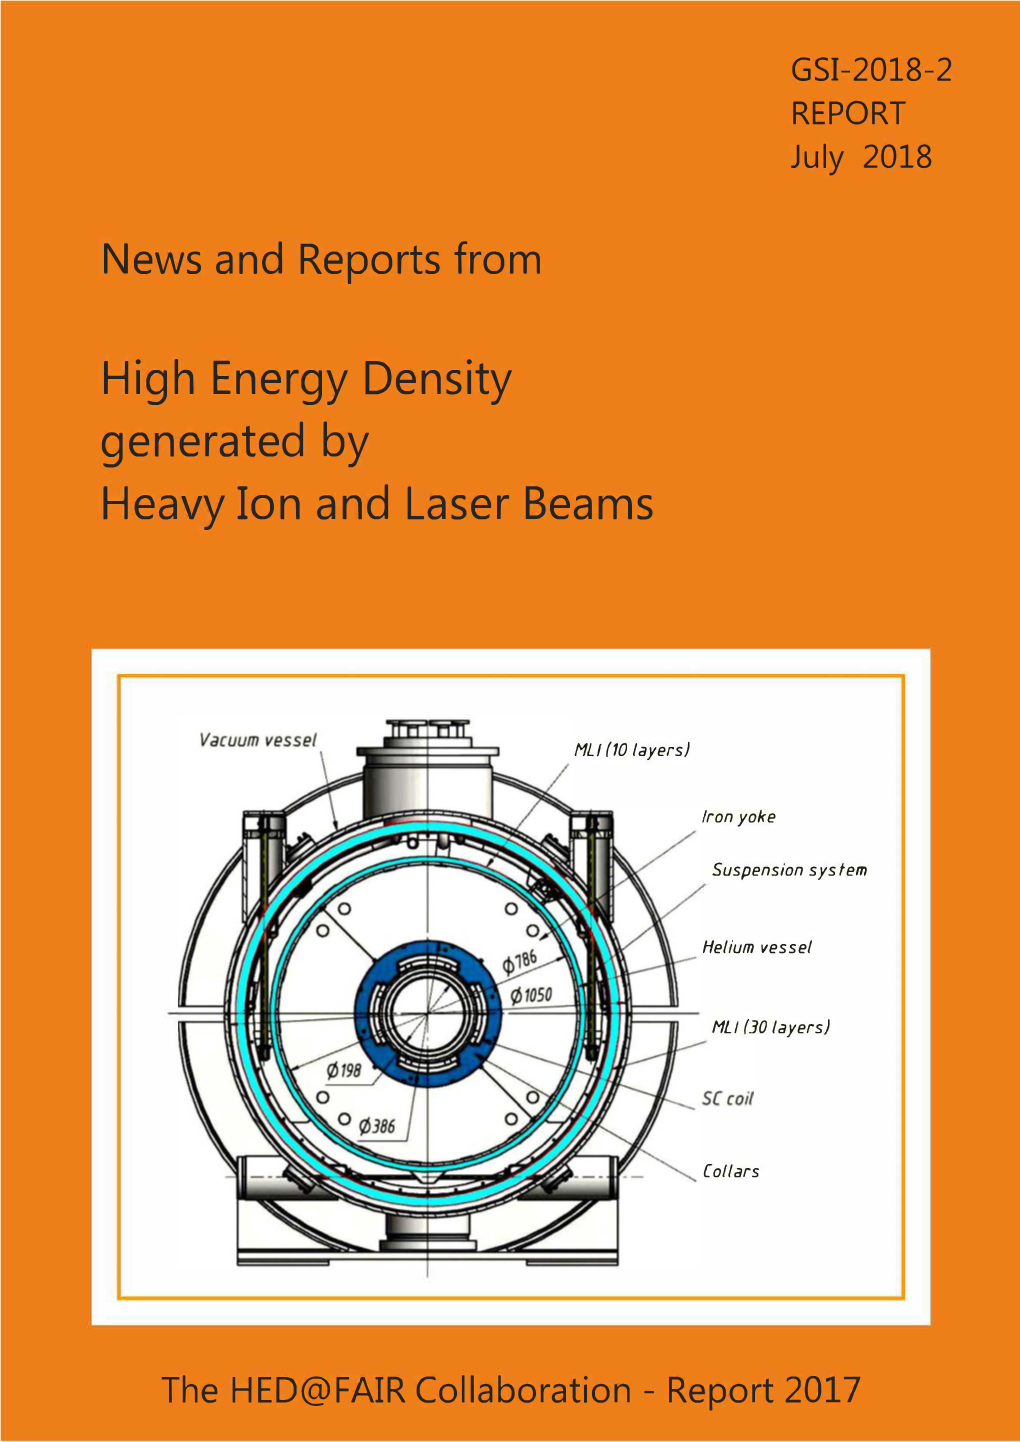 High Energy Density Generated by Heavy Ion and Laser Beams